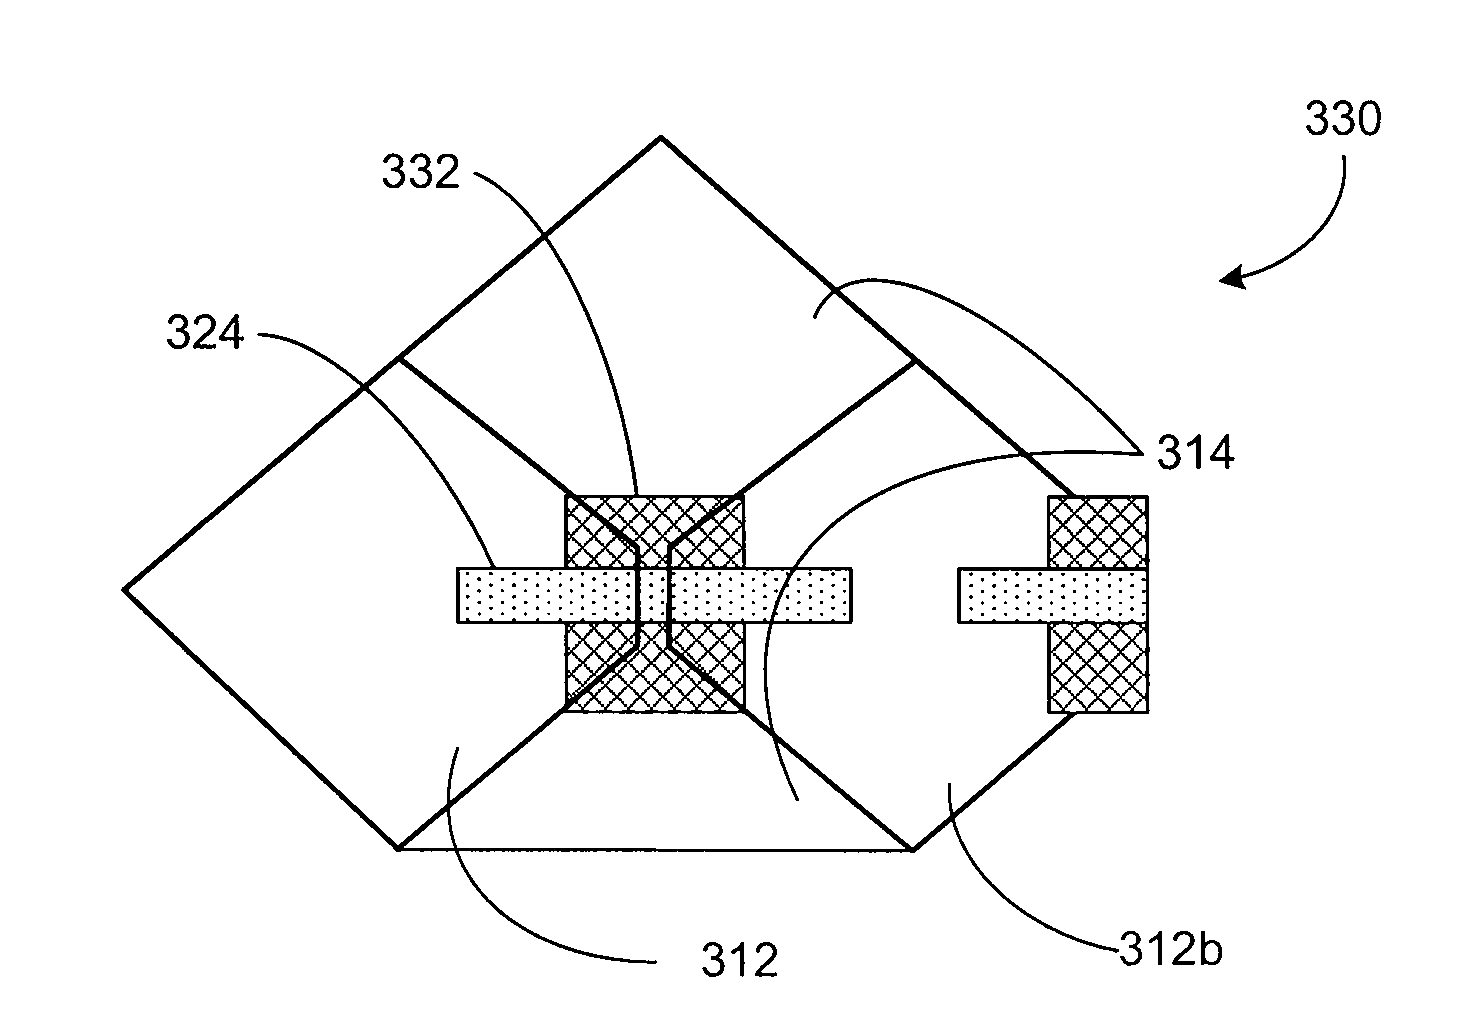 Capacitive sensor having electrodes arranged on the substrate and the flex circuit